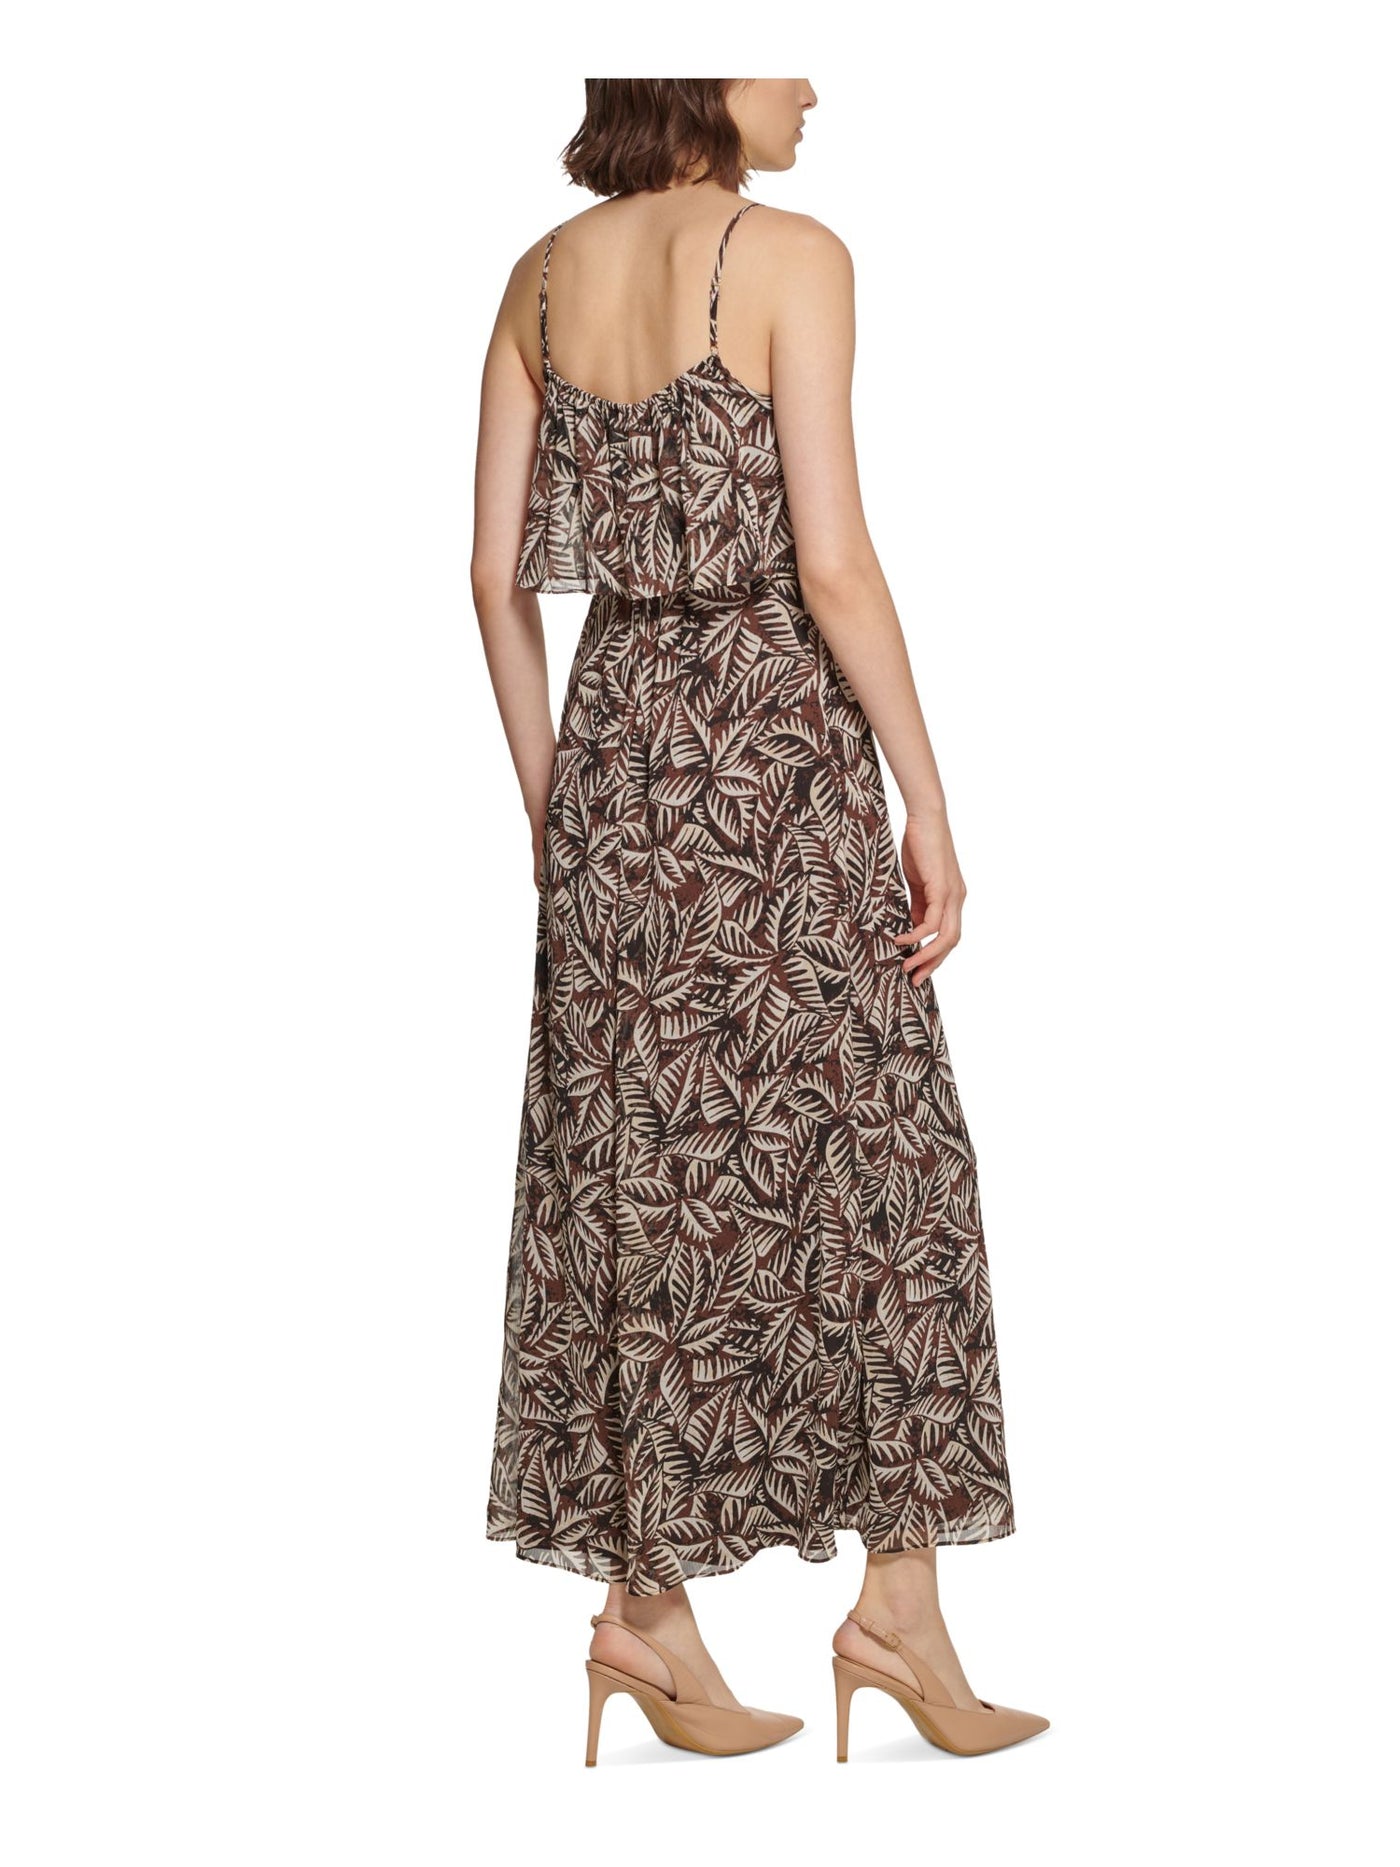 CALVIN KLEIN Womens Brown Adjustable Popover Lined Tie Belt Printed Spaghetti Strap Square Neck Maxi Fit + Flare Dress 12